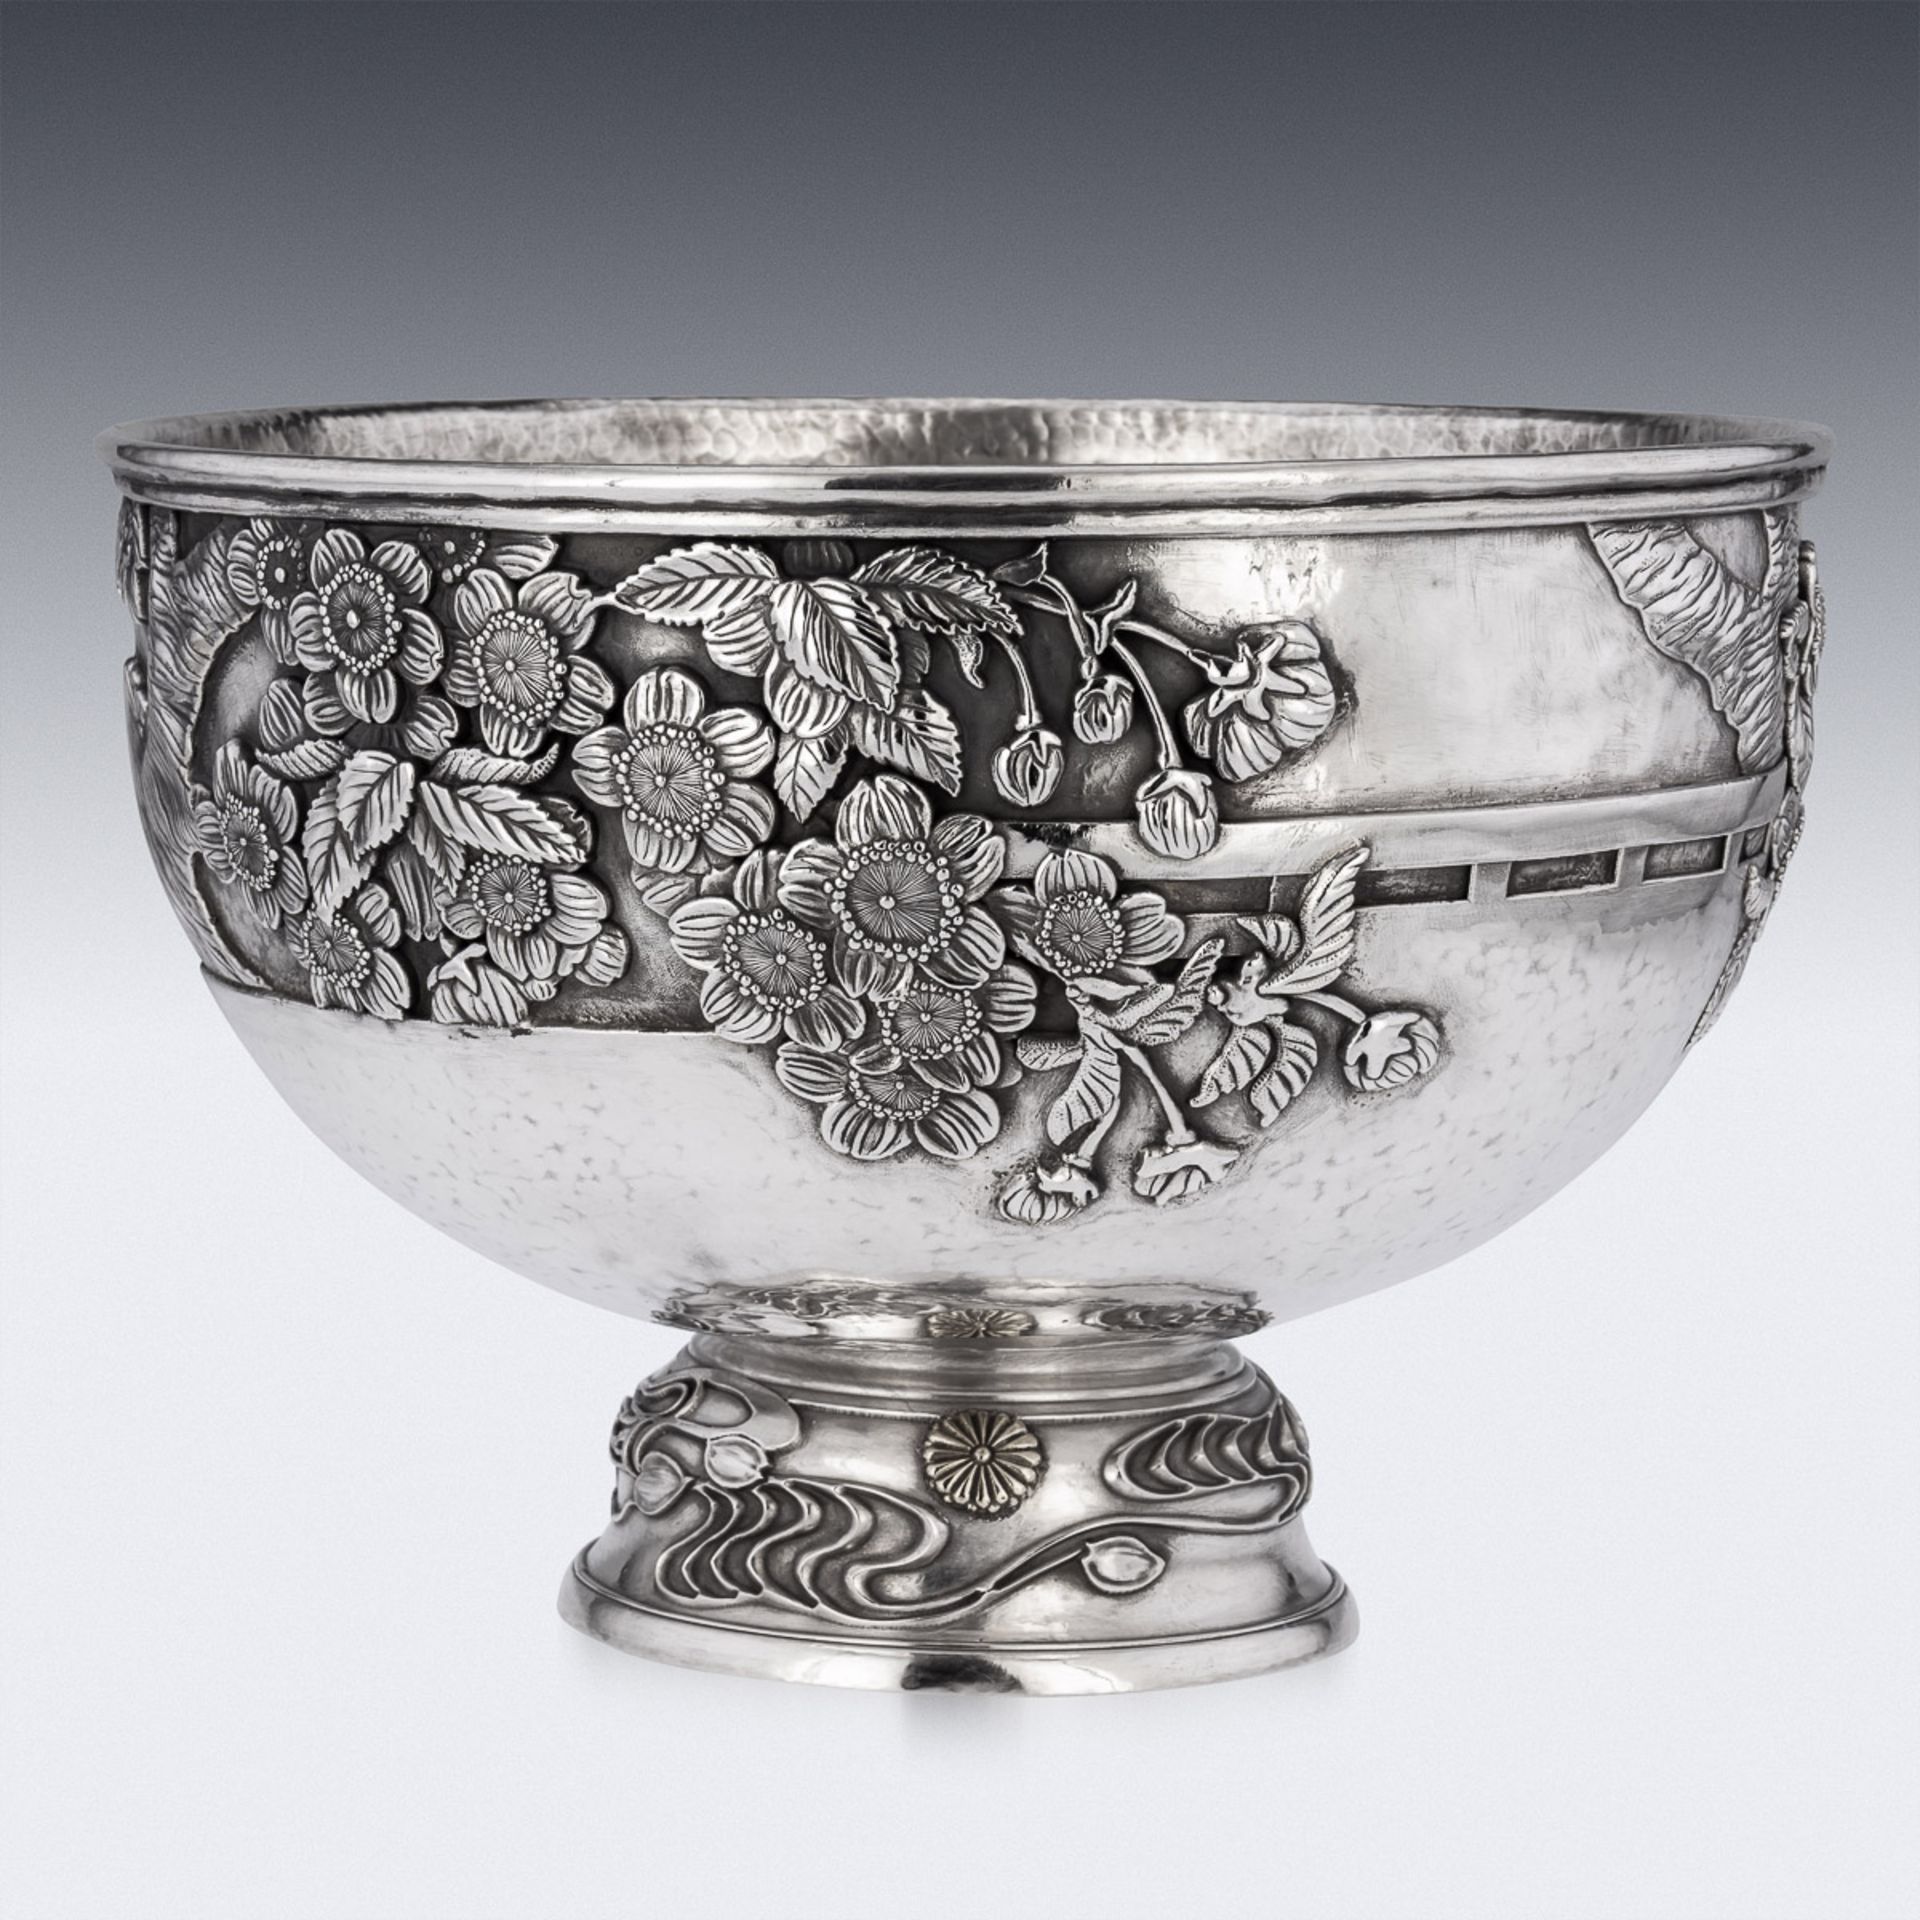 A MONUMENTAL LATE 19TH CENTURY JAPANESE SOLID SILVER BOWL C. 1900 - Image 3 of 17